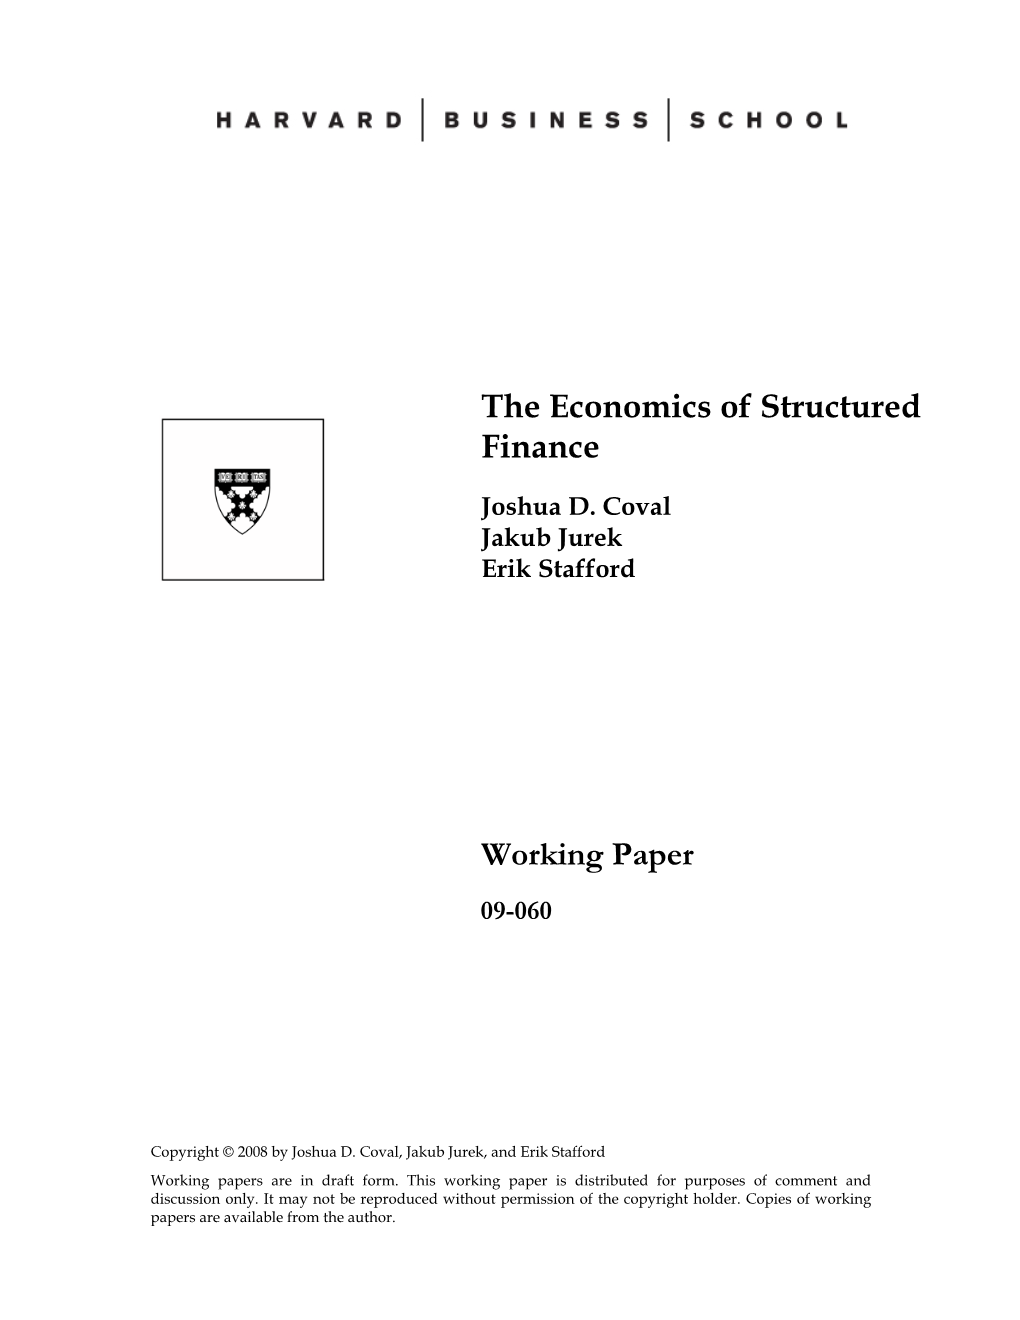 The Economics of Structured Finance